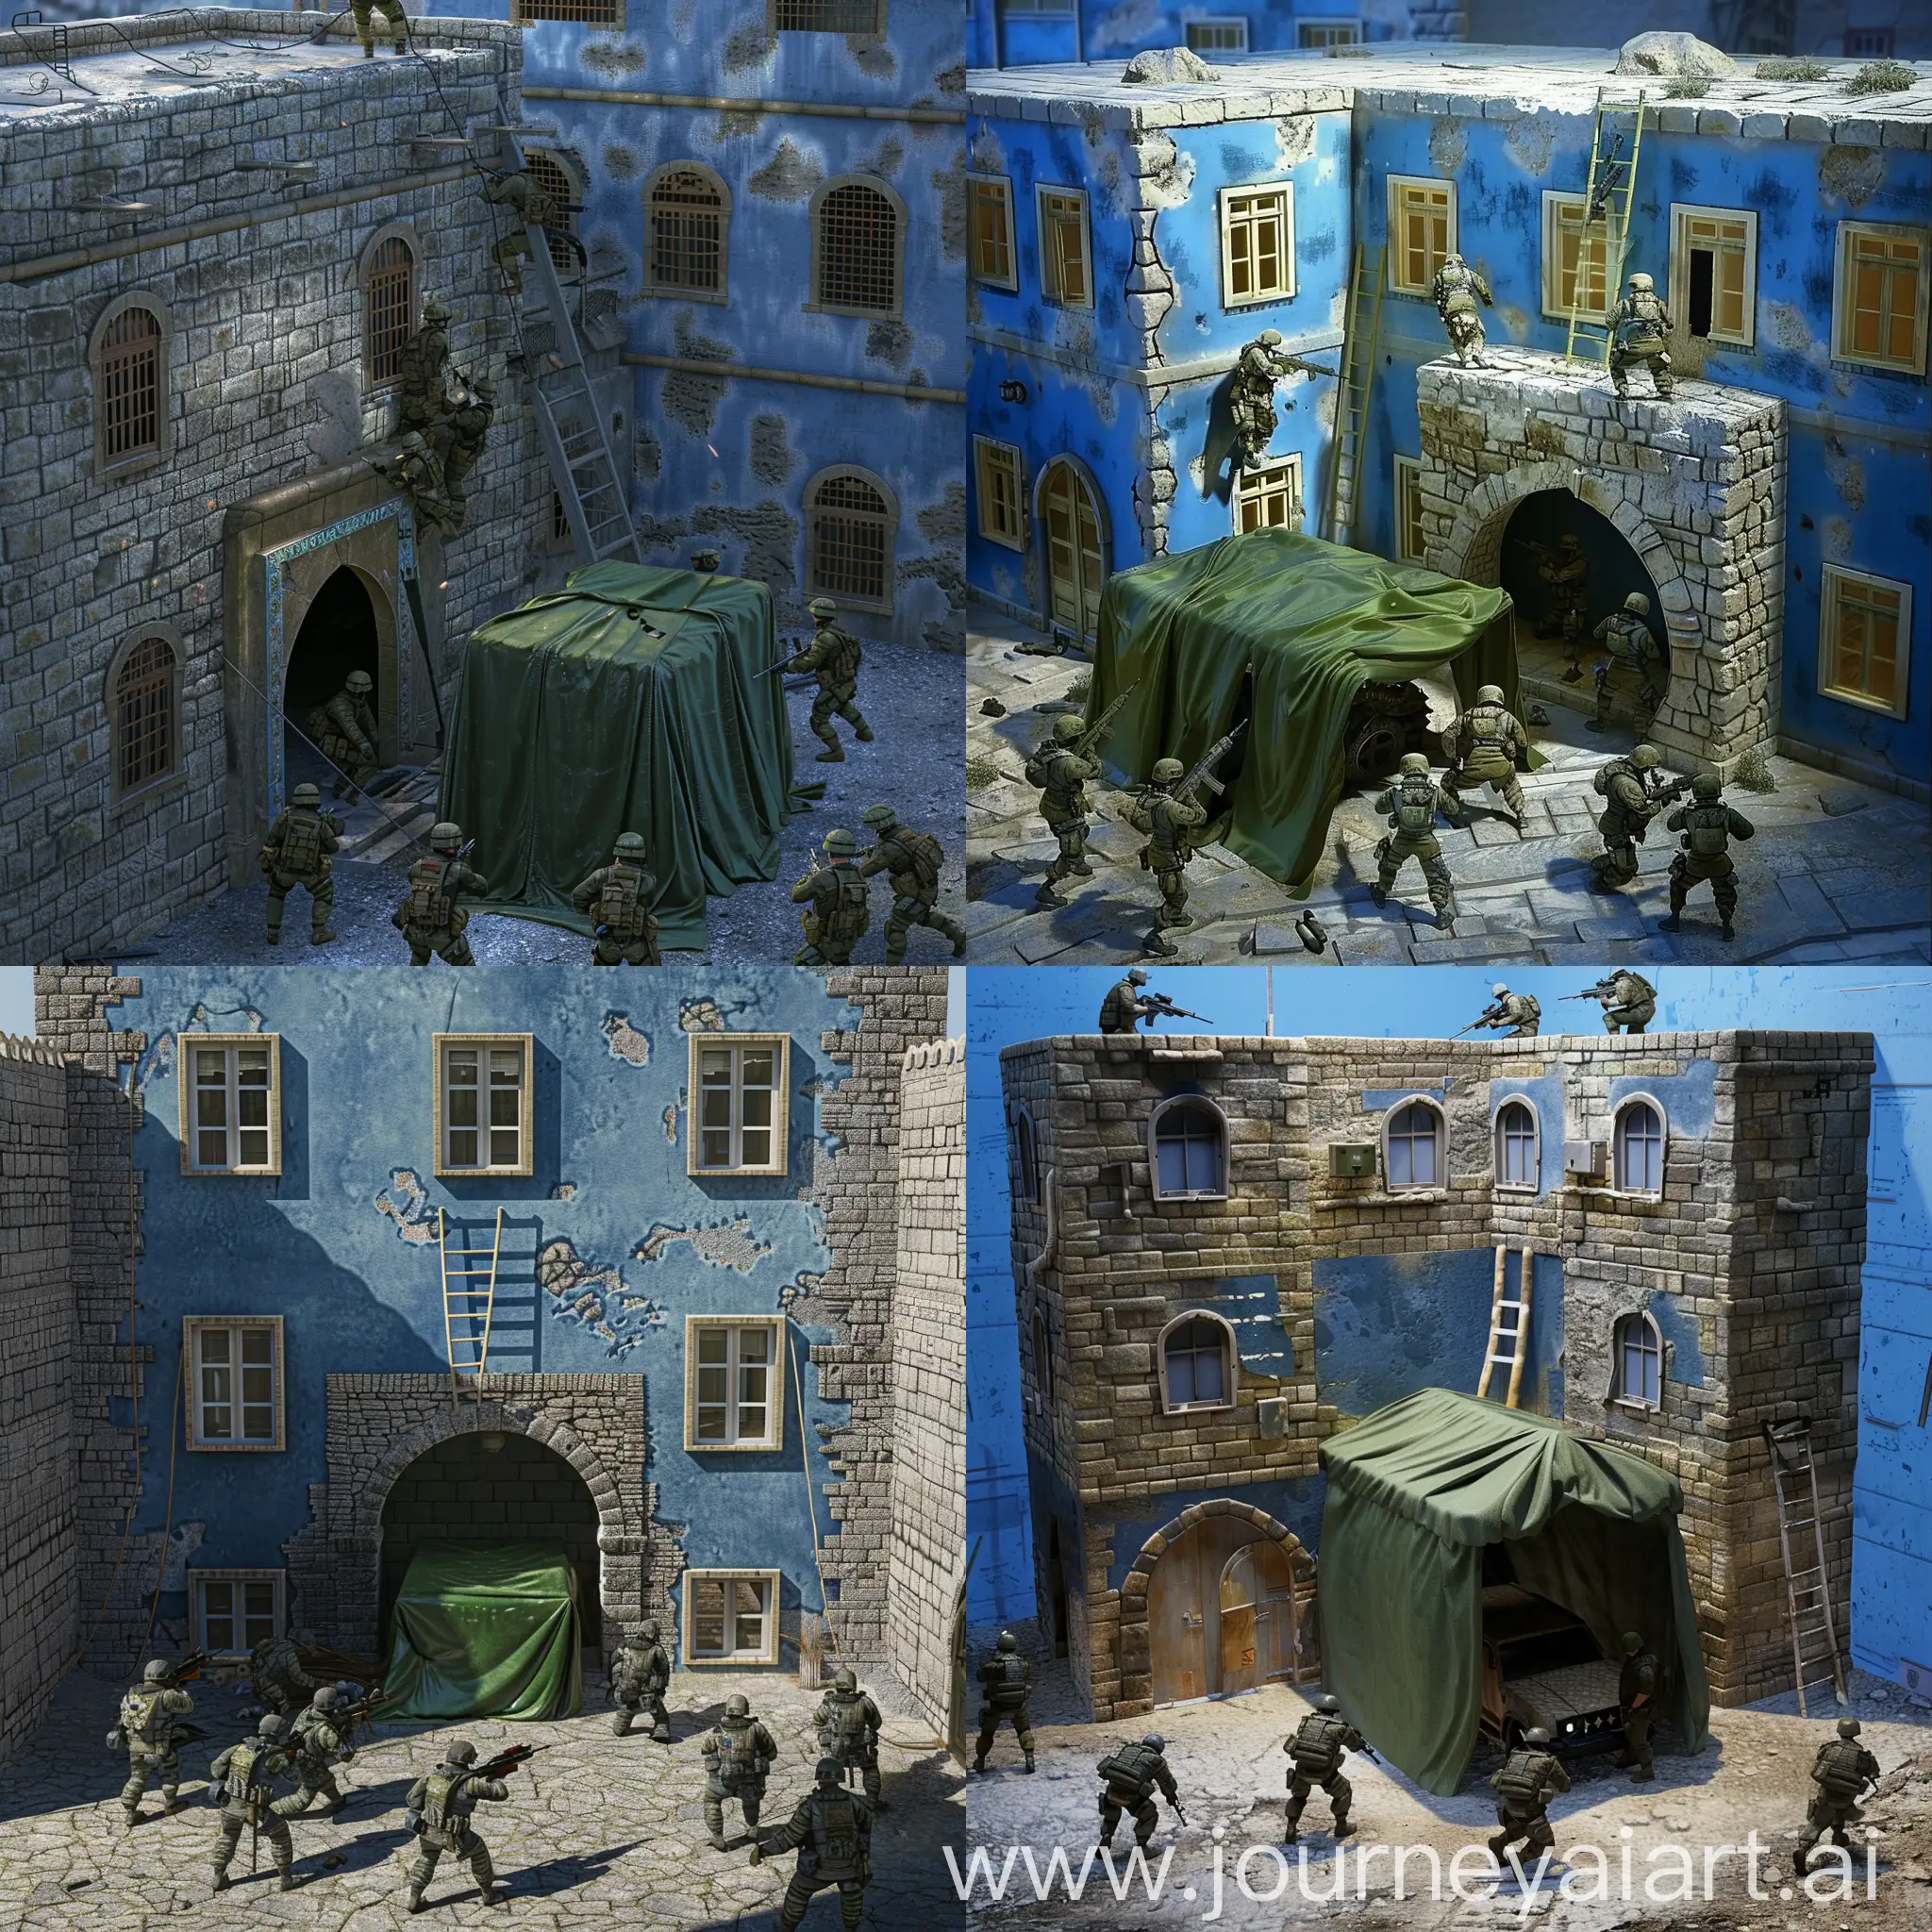 /imagine prompt: An urban battlefield scene set in a Middle Eastern or Mediterranean architectural style. Features stone-built walls and an arch-shaped door. In the center, there is a makeshift green carport covered with fabric. The building windows are rectangular and painted on blue walls. Several soldiers are equipped in battle gear, taking combat stances, positioned around the structure taking cover. The lighting is daytime with short shadows, ensuring all details of the building are clearly visible. A ladder is placed on top of the carport. Overall, the scene should have a combative and tense atmosphere, captured from a top-down perspective to clearly show the layout.
